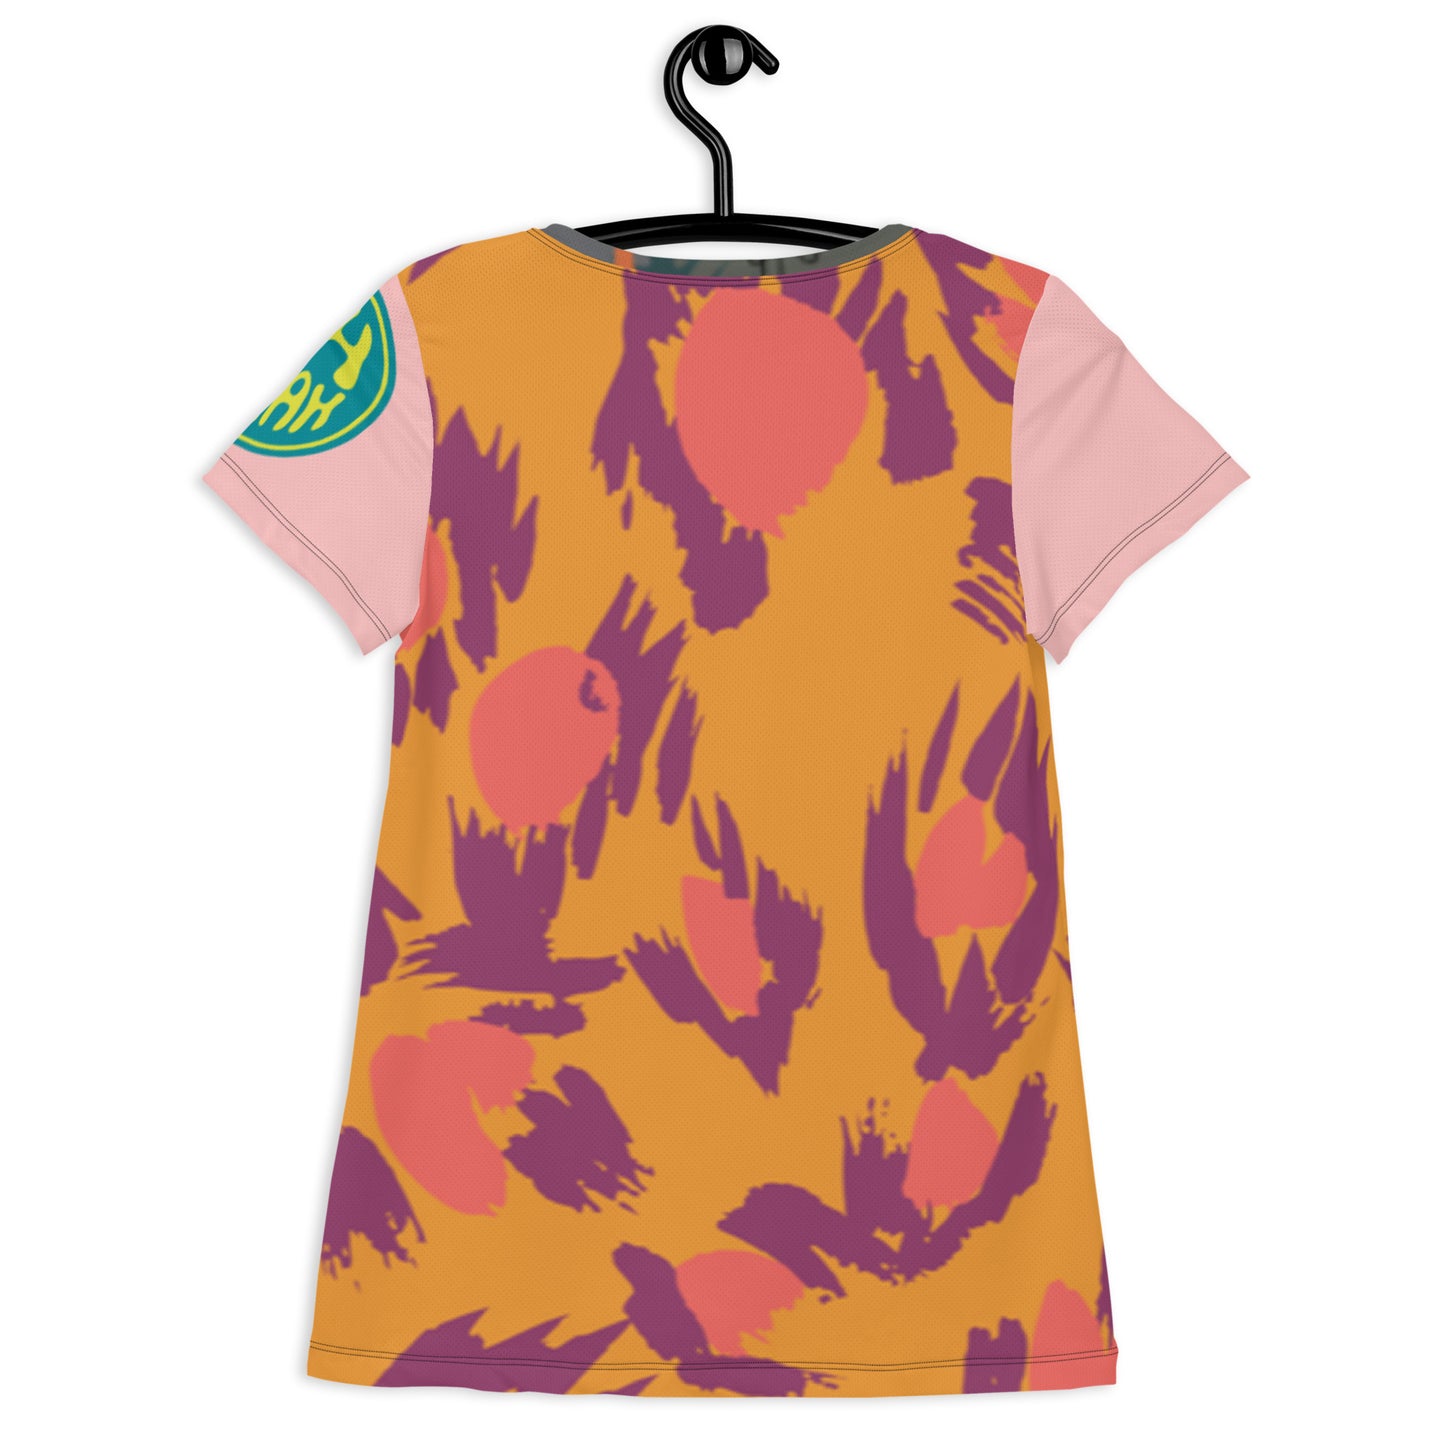 Fun Mix Printed Top Oh Yeah on Sleeve - DMD Bags